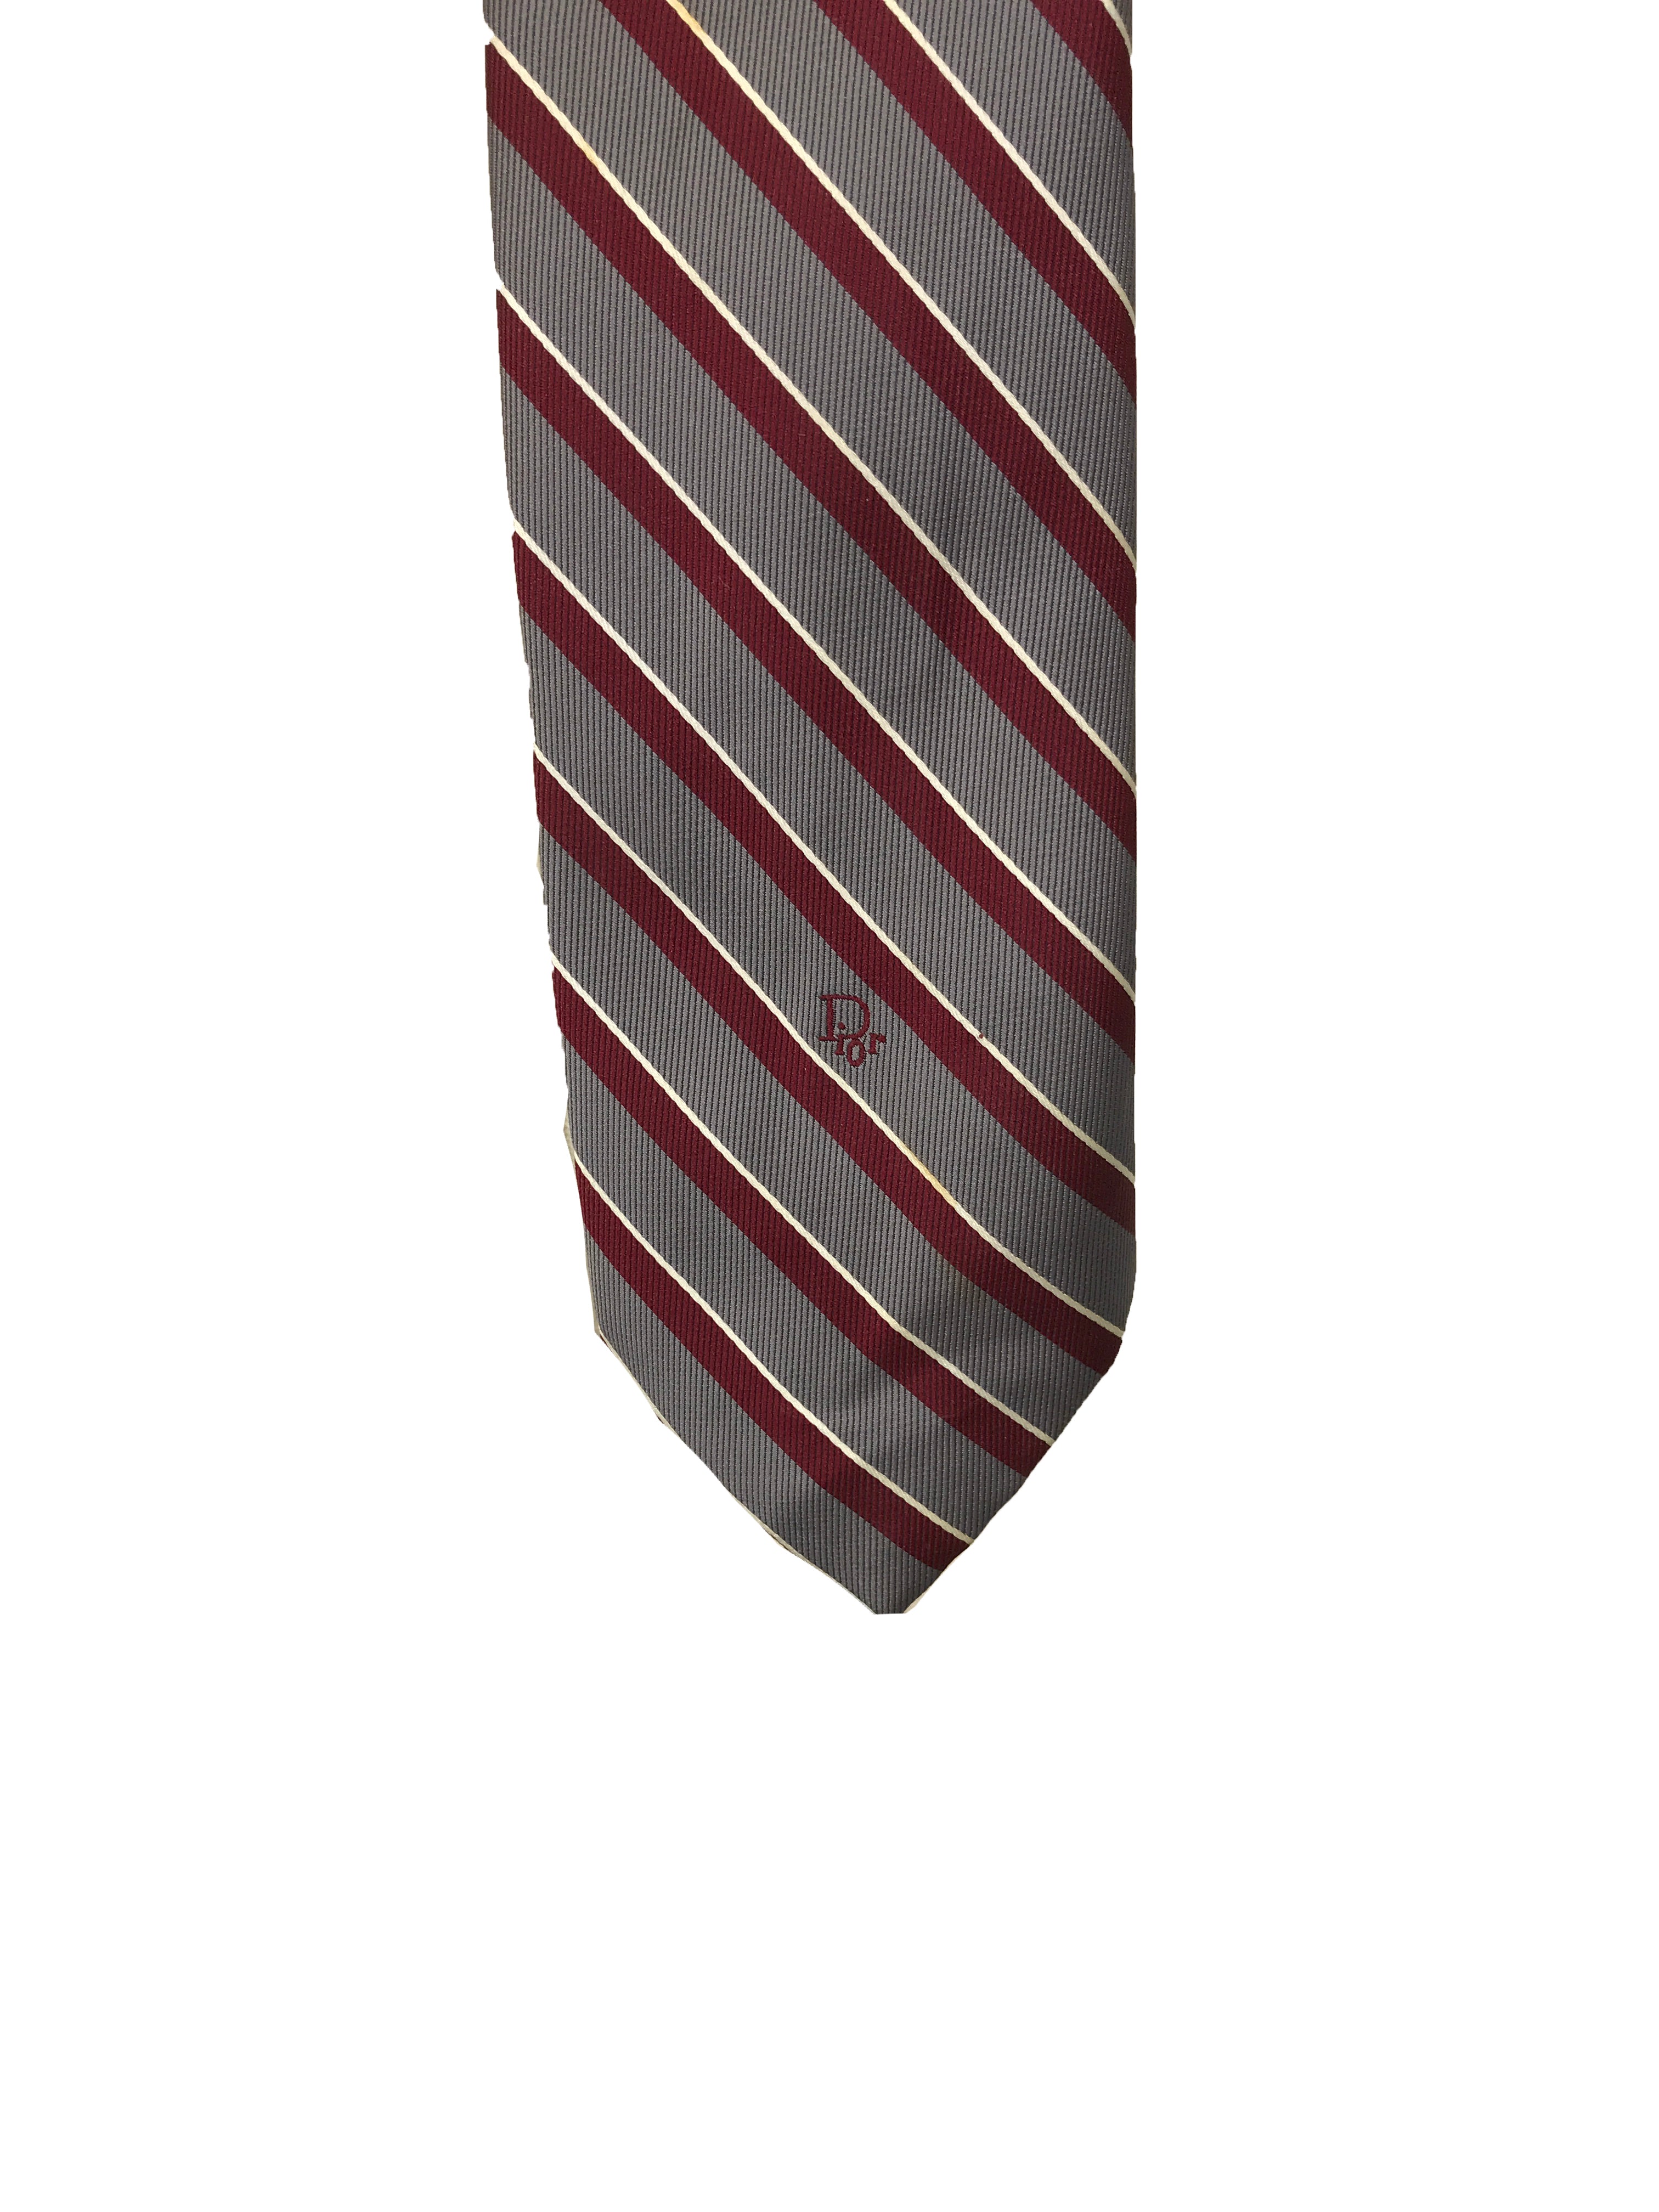 Christian Dior Red and Silver Stripe Tie Men's OS